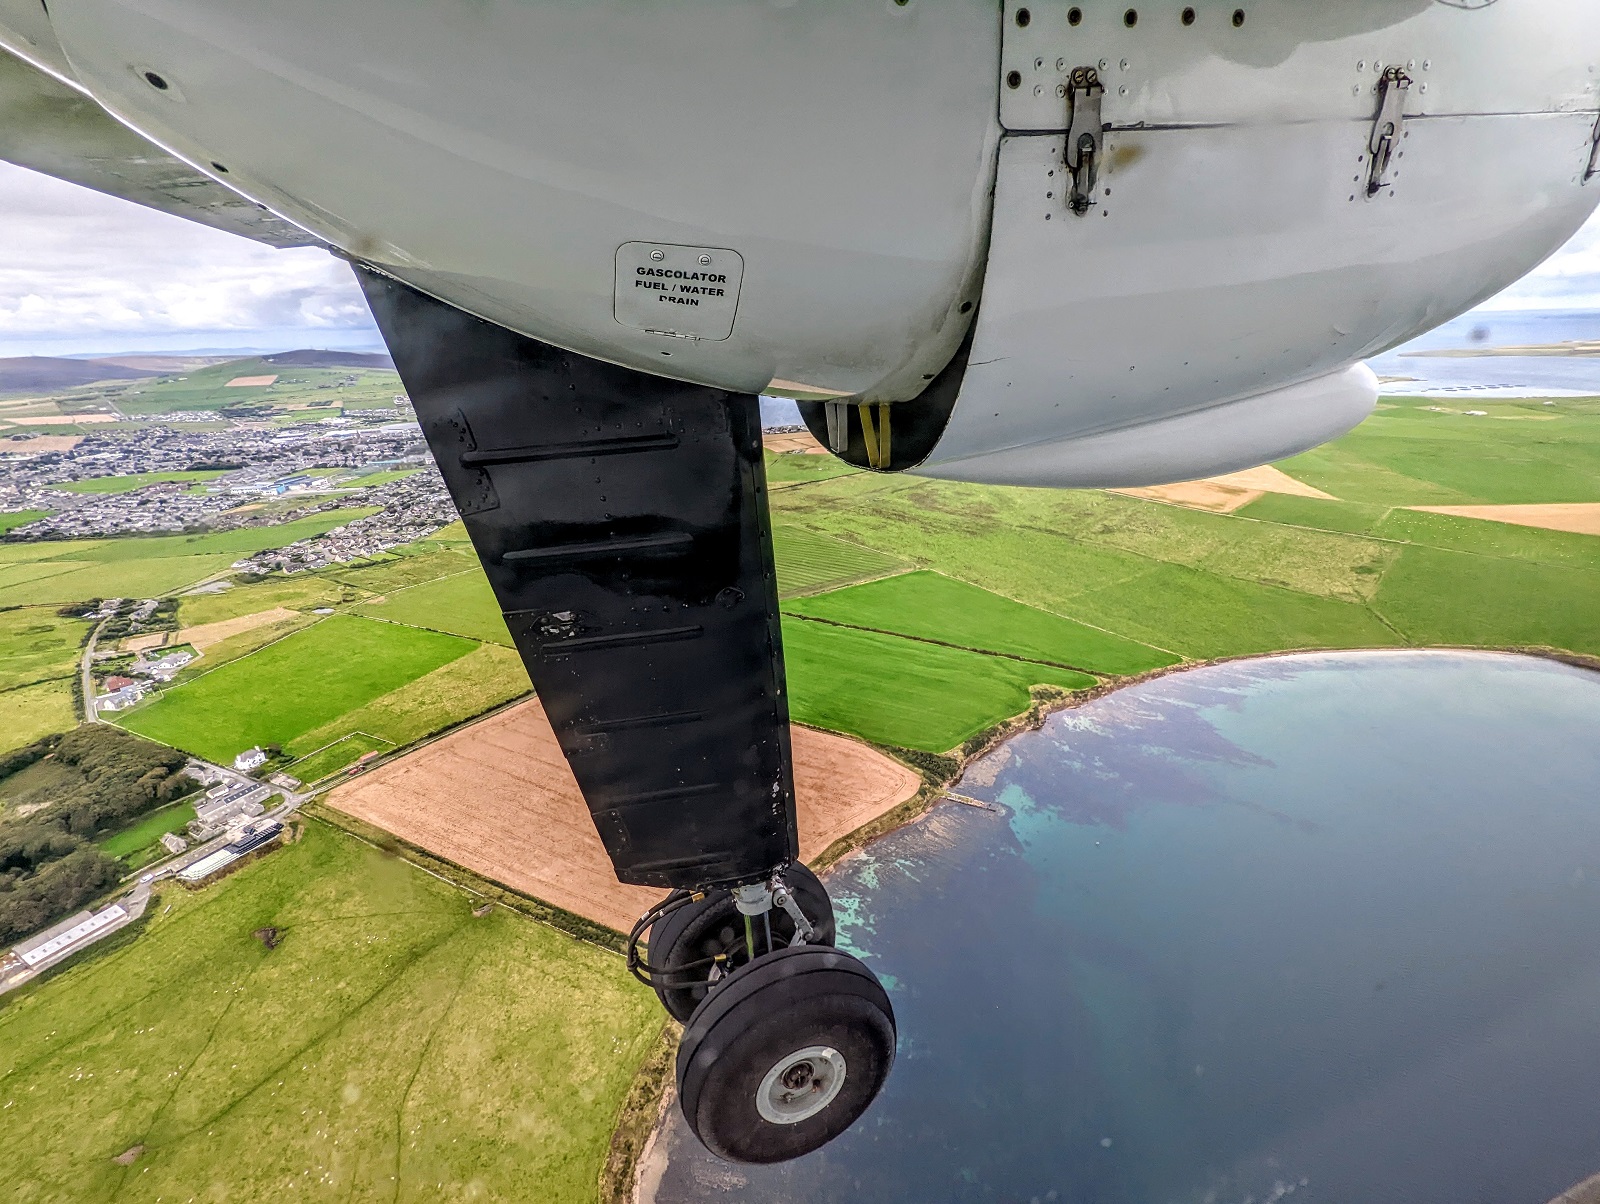 Flying over the Orkney Islands